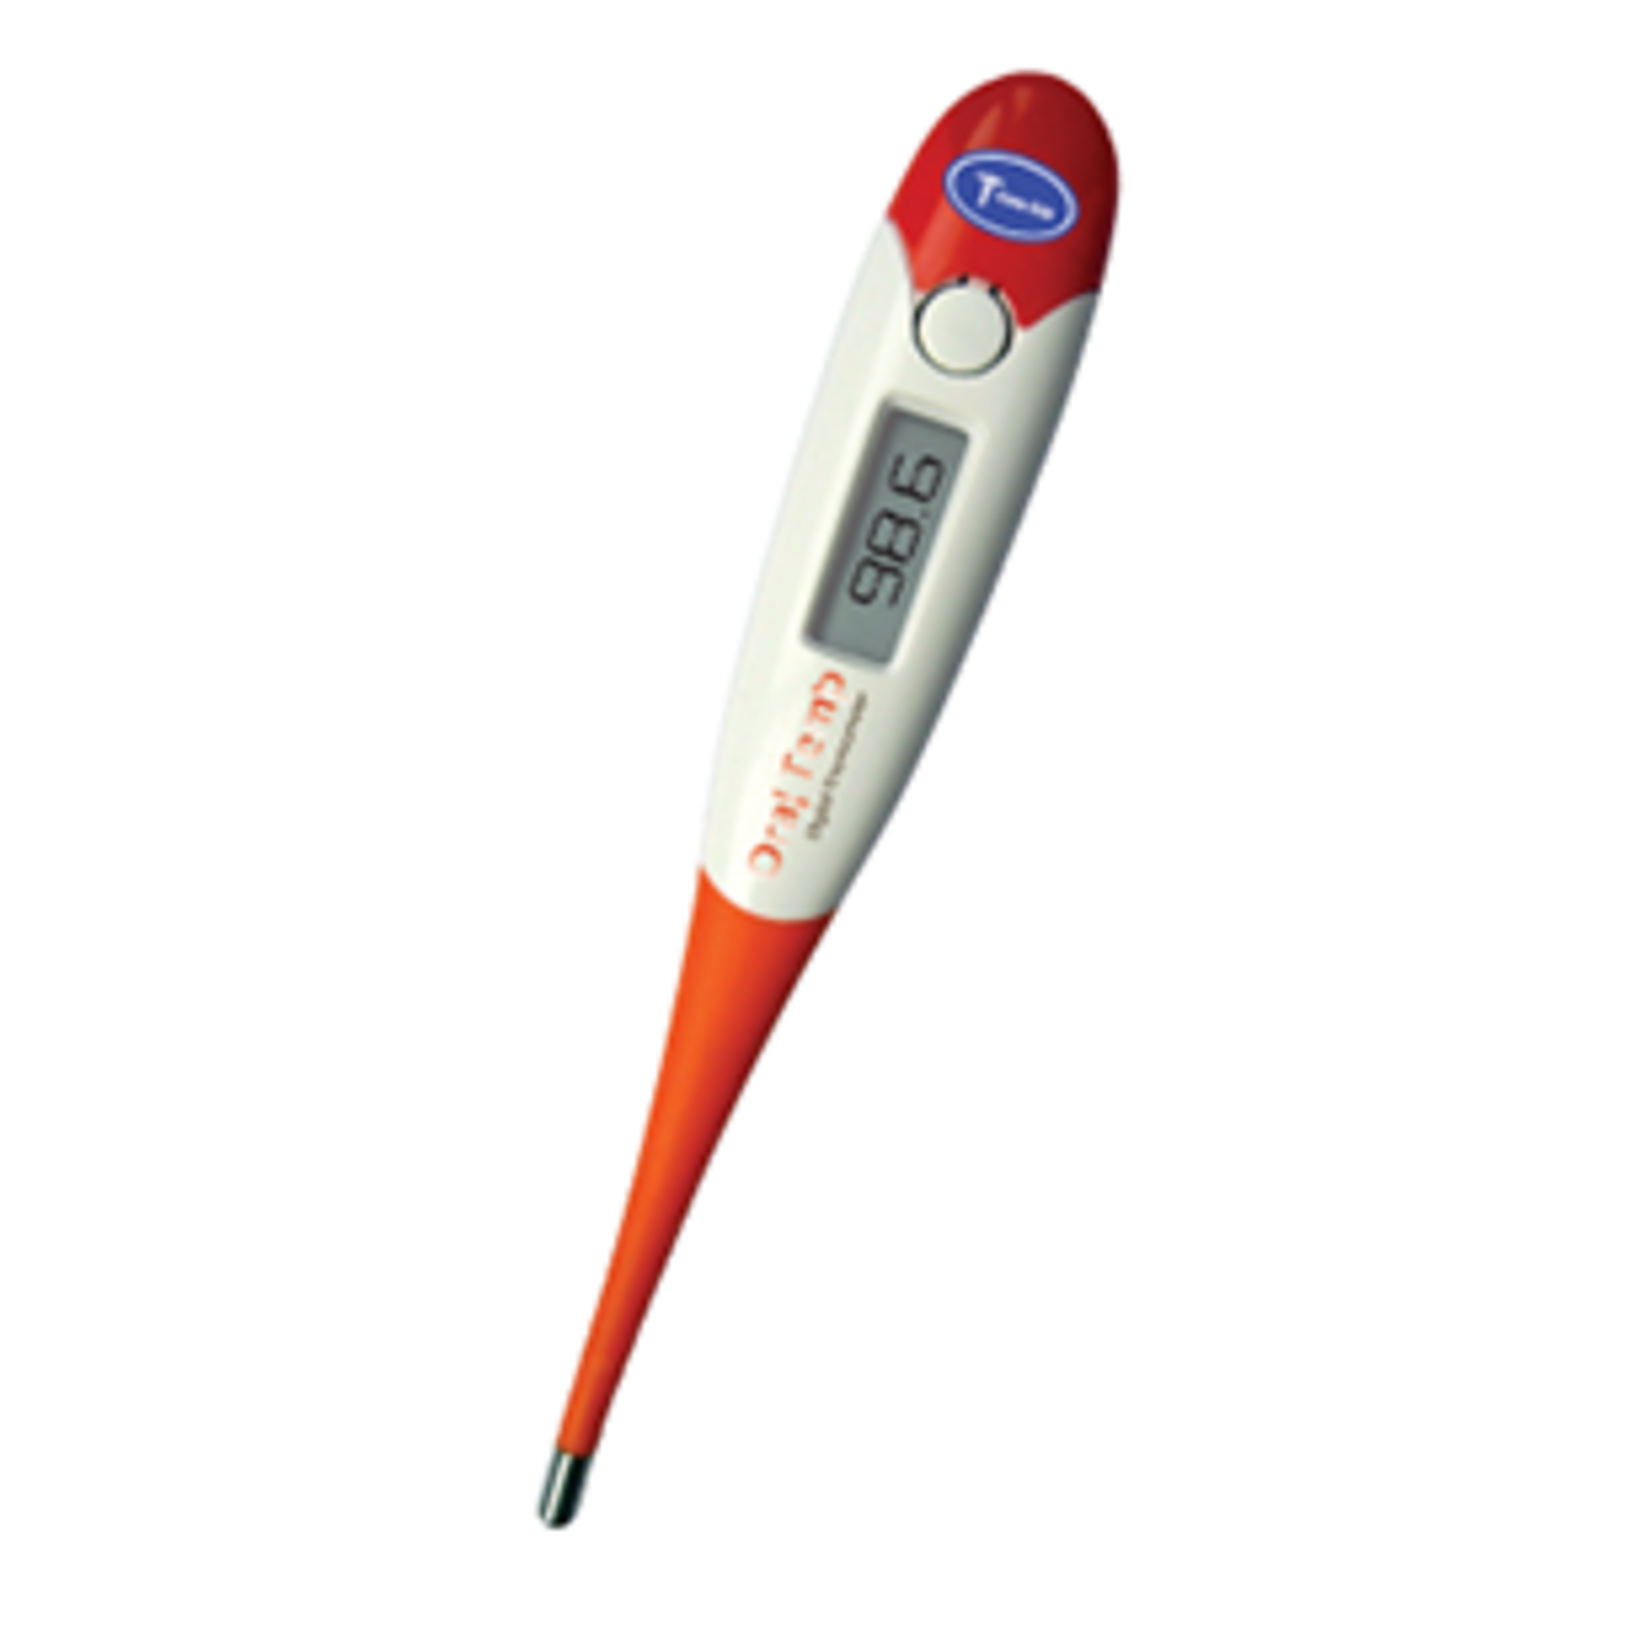 Oral Temp Thermometer - NDC# 91237-0001-54 - Durable Health Medical Supply  LLC